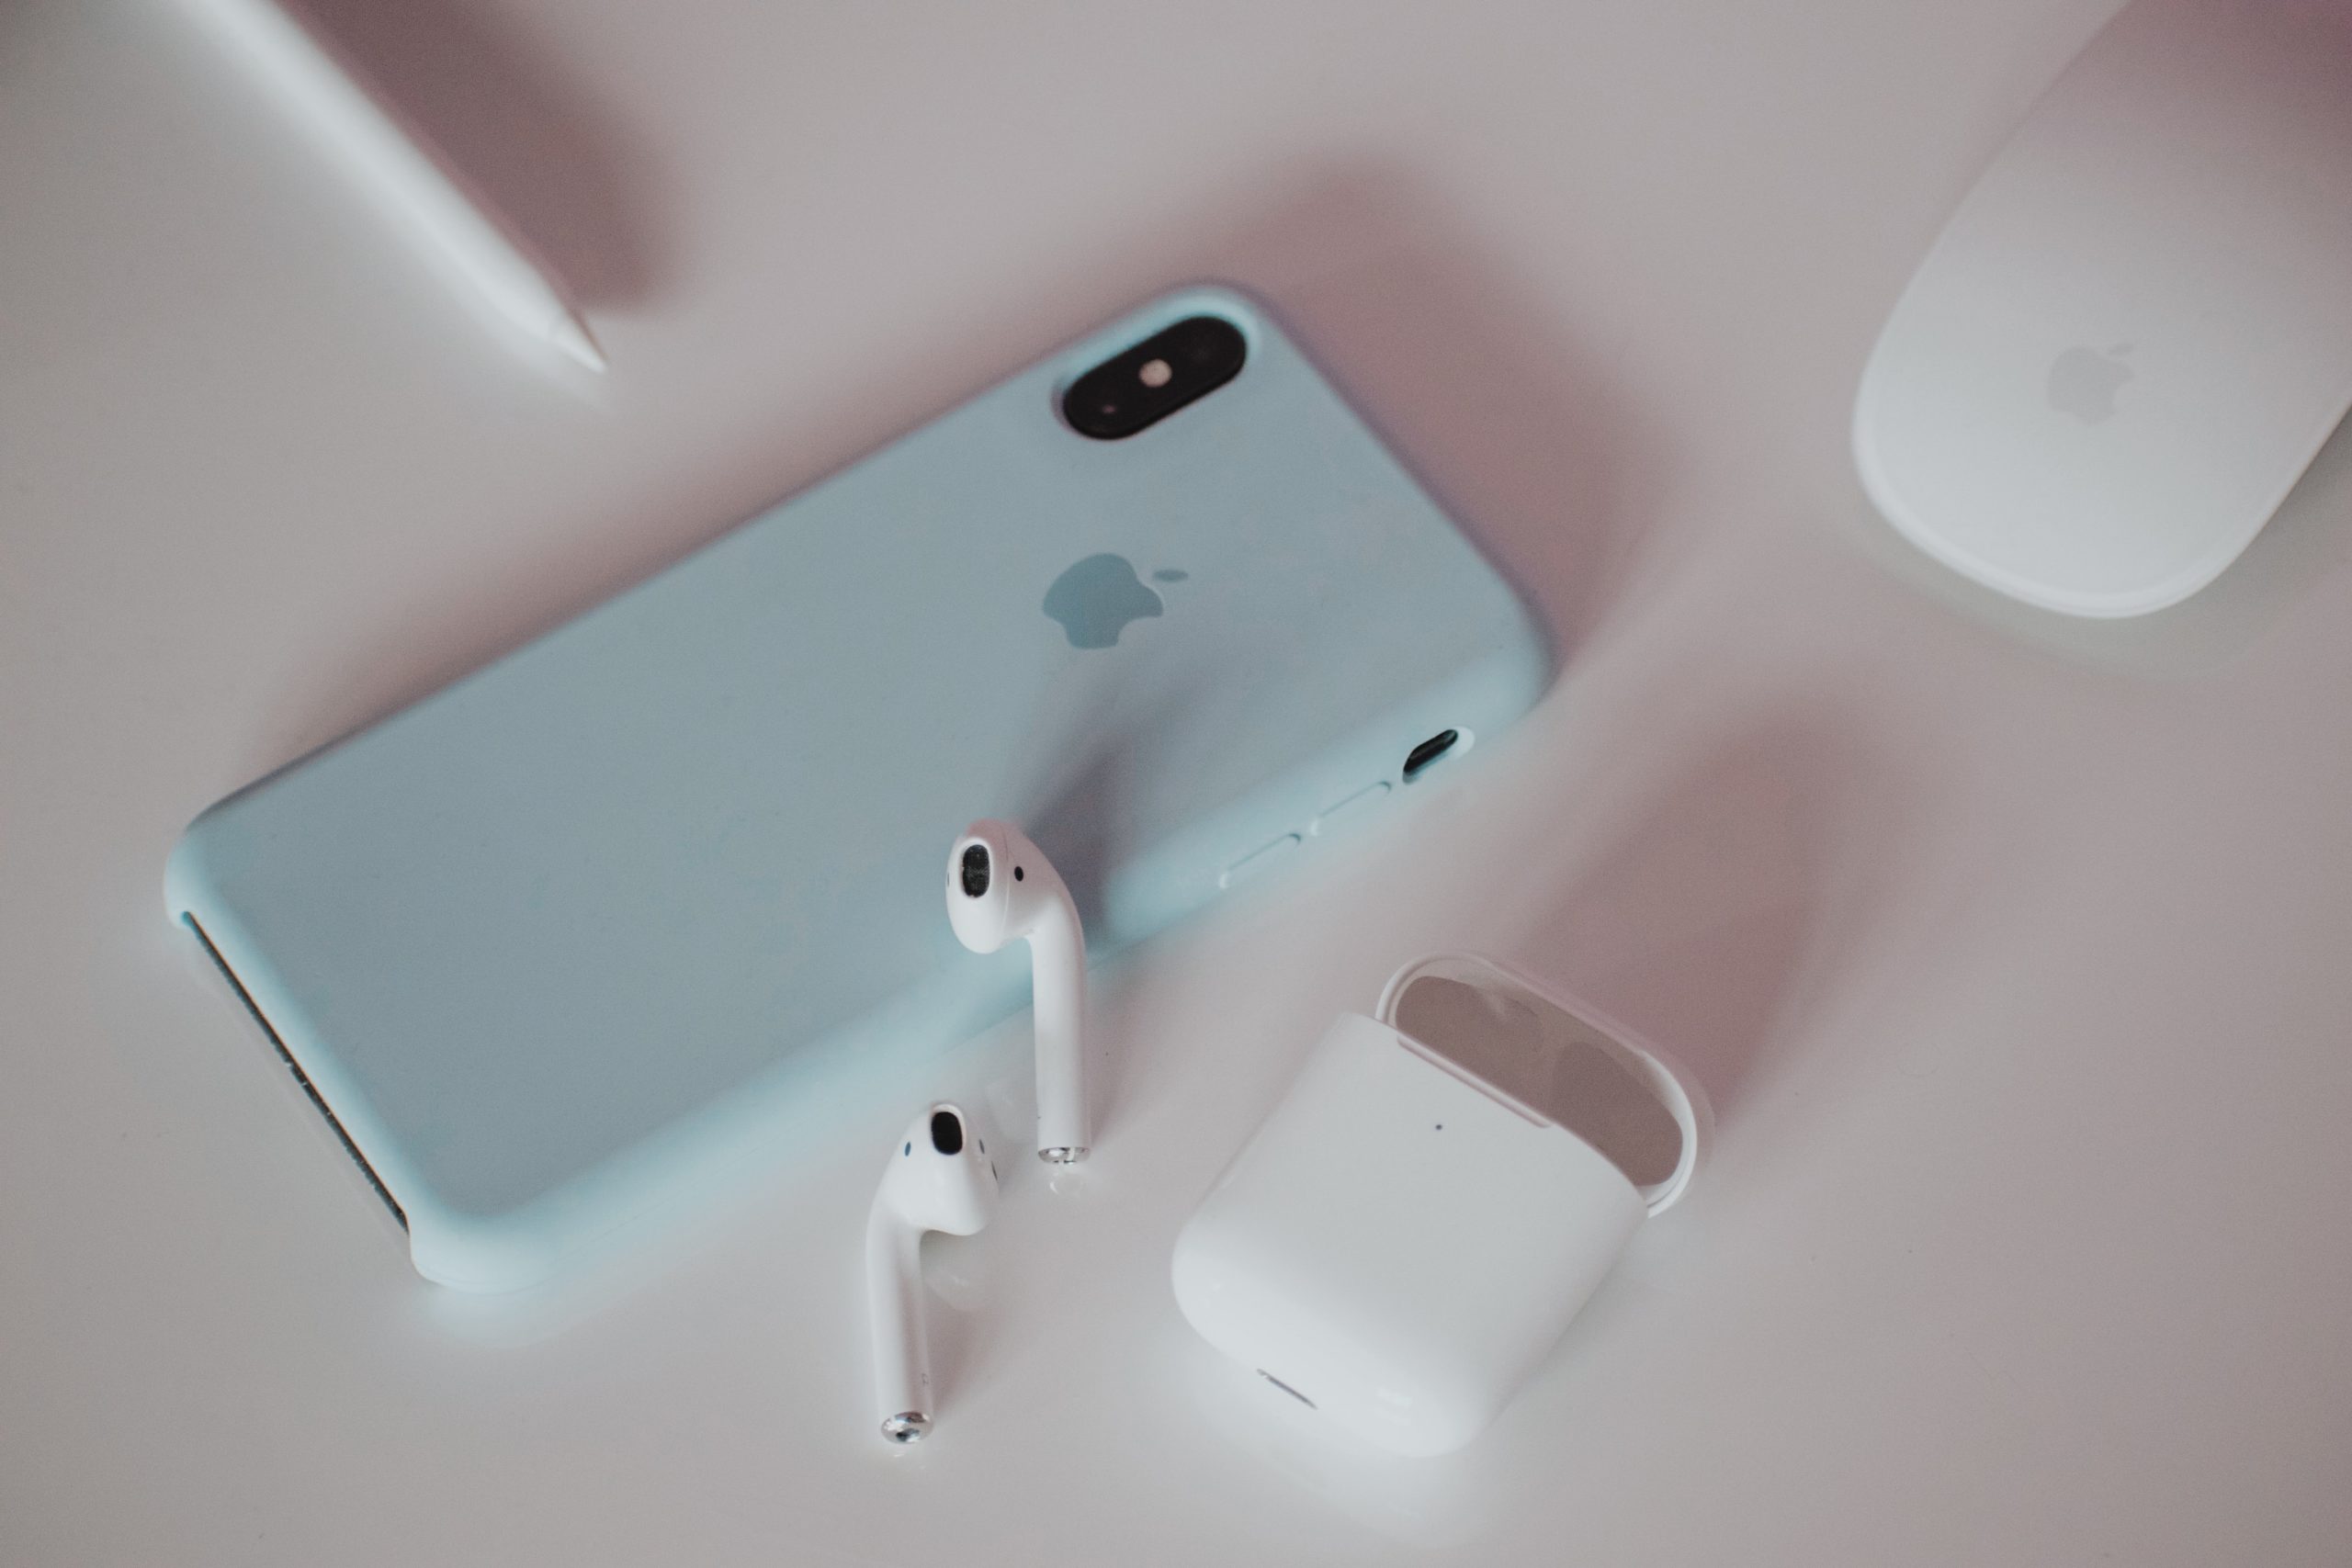 apple airpods iphone unsplash scaled